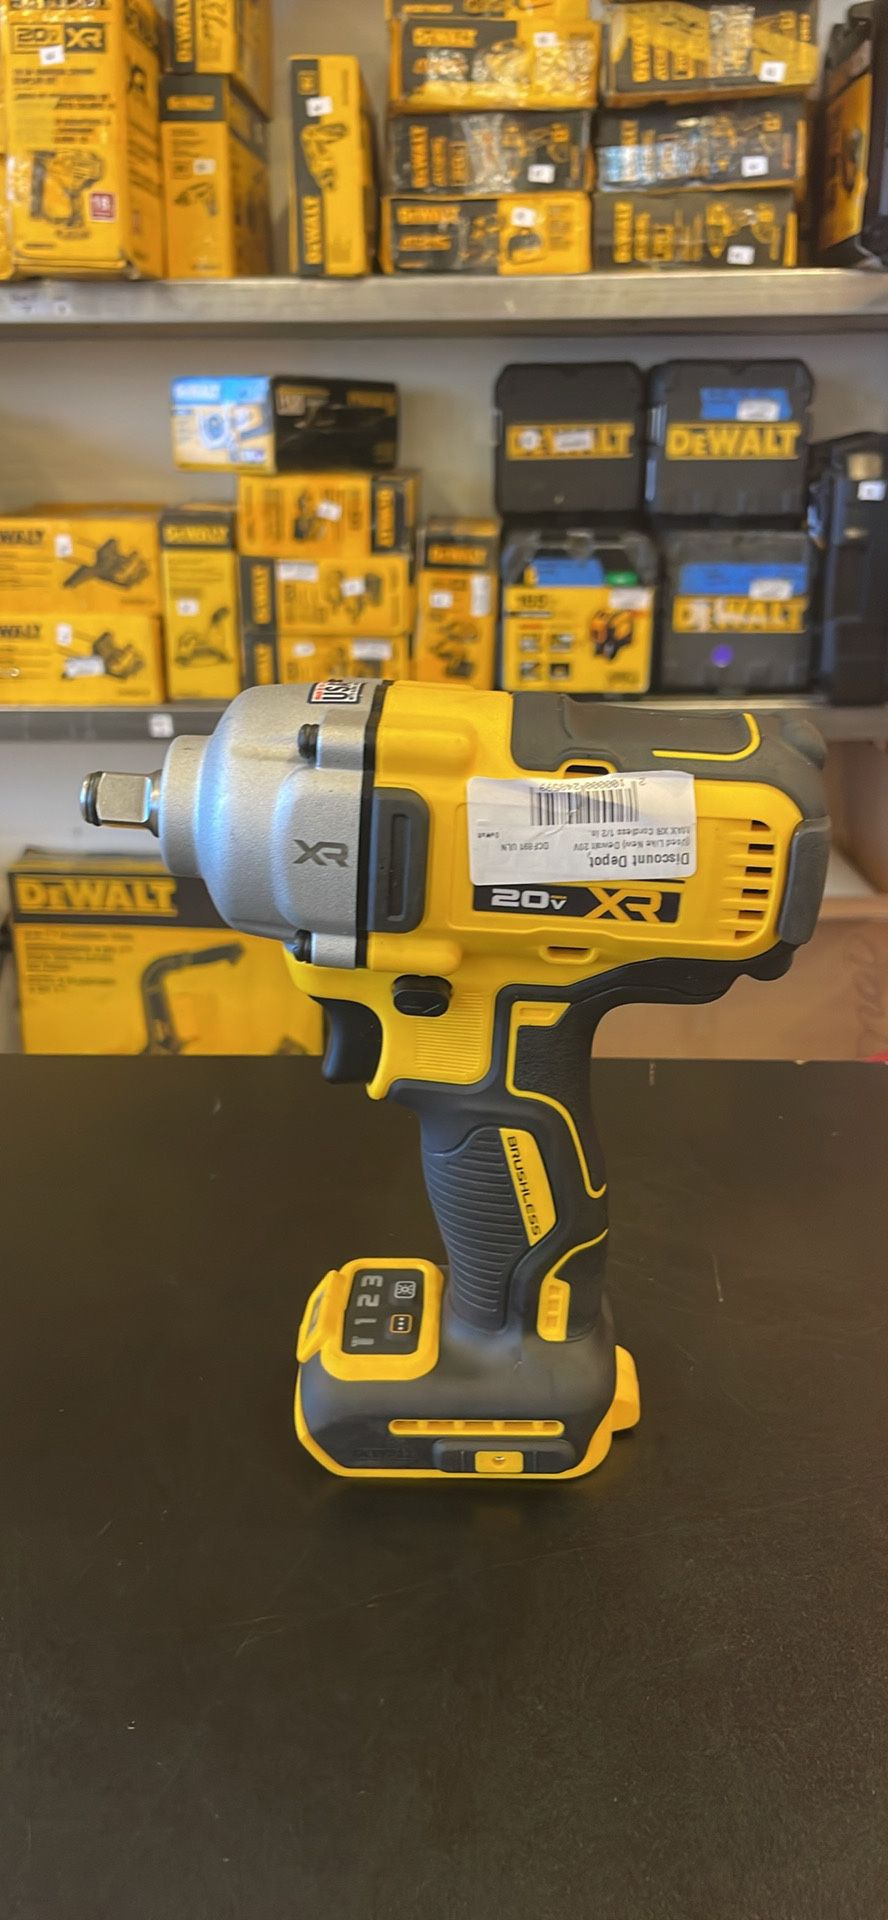 DEWALT 20V MAX XR Cordless 1/2 in. Impact Wrench (Tool Only)DCF891